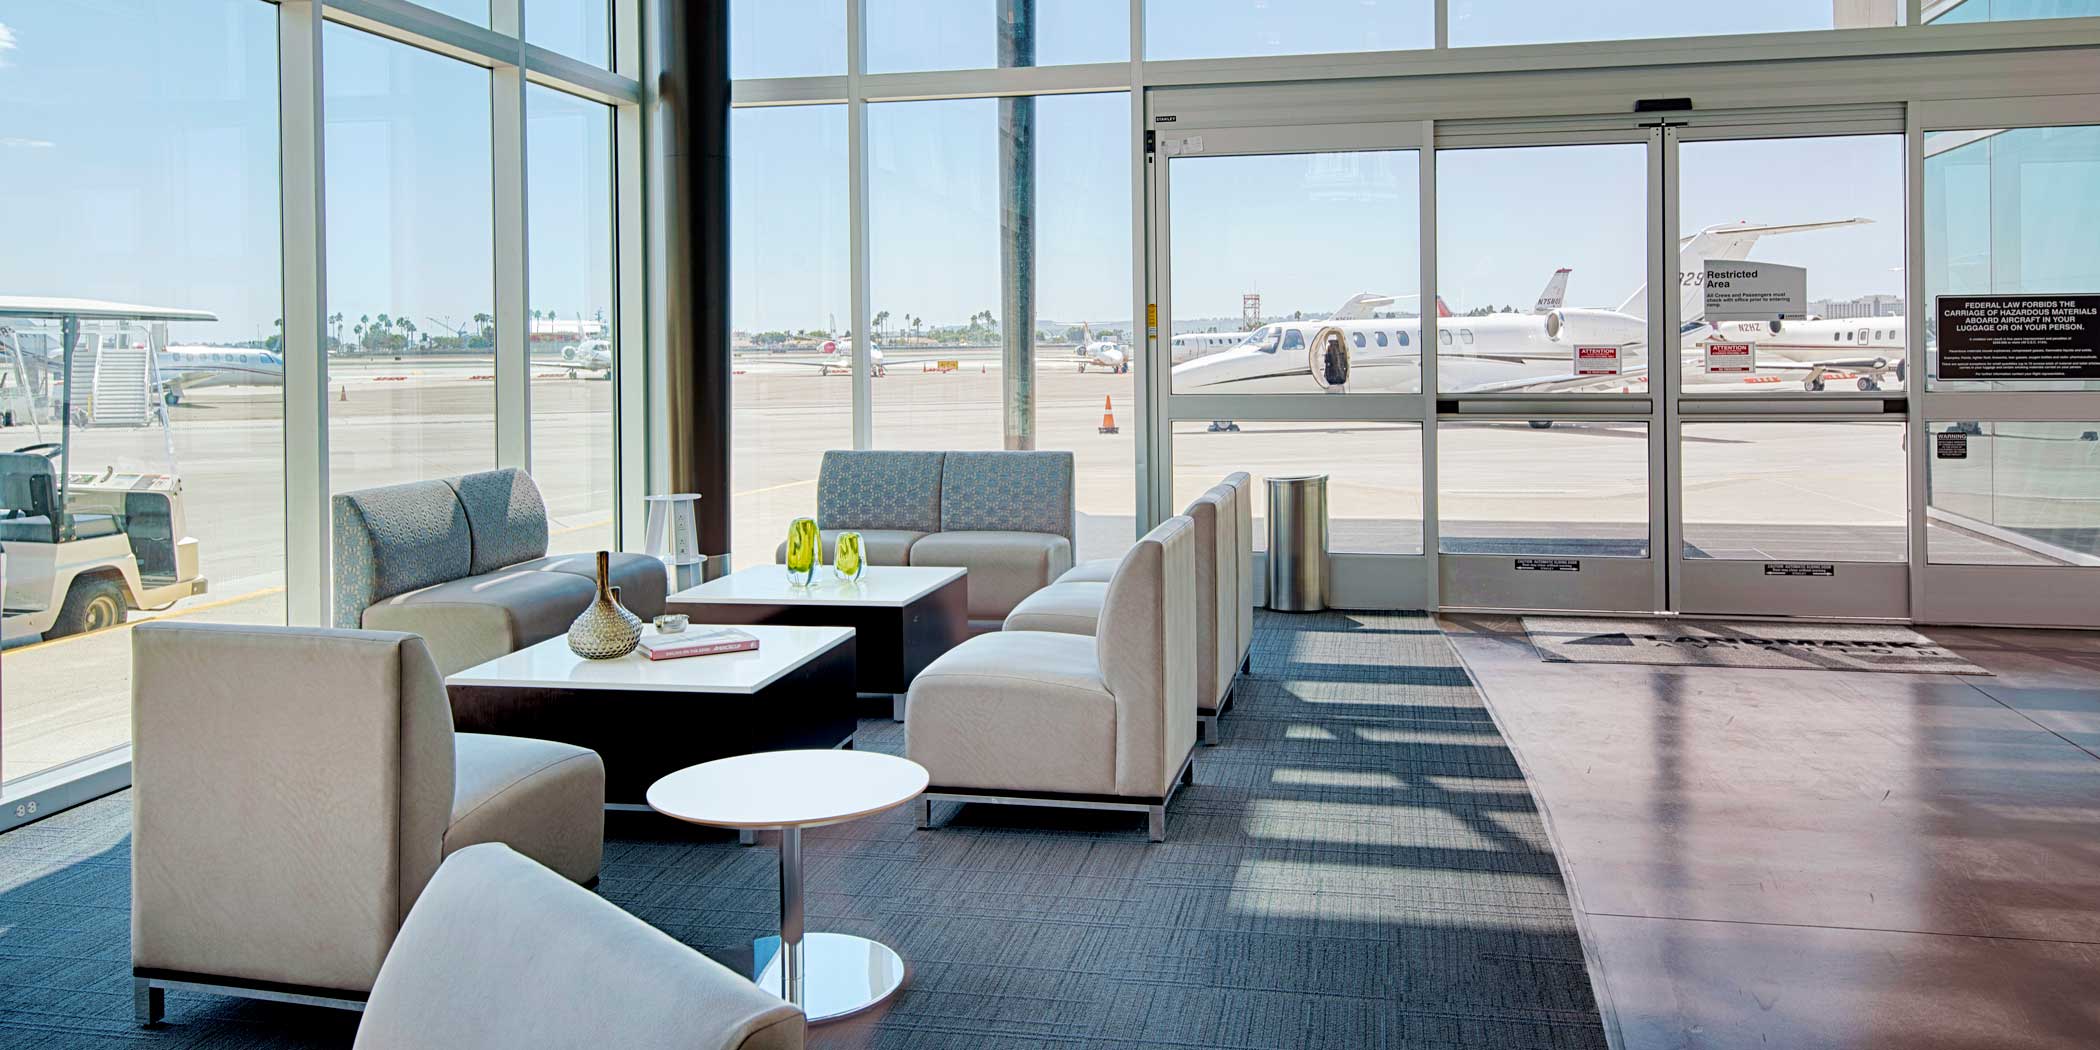 Fbos Spread Their Wings For The On Demand Crowd Business Jet Traveler